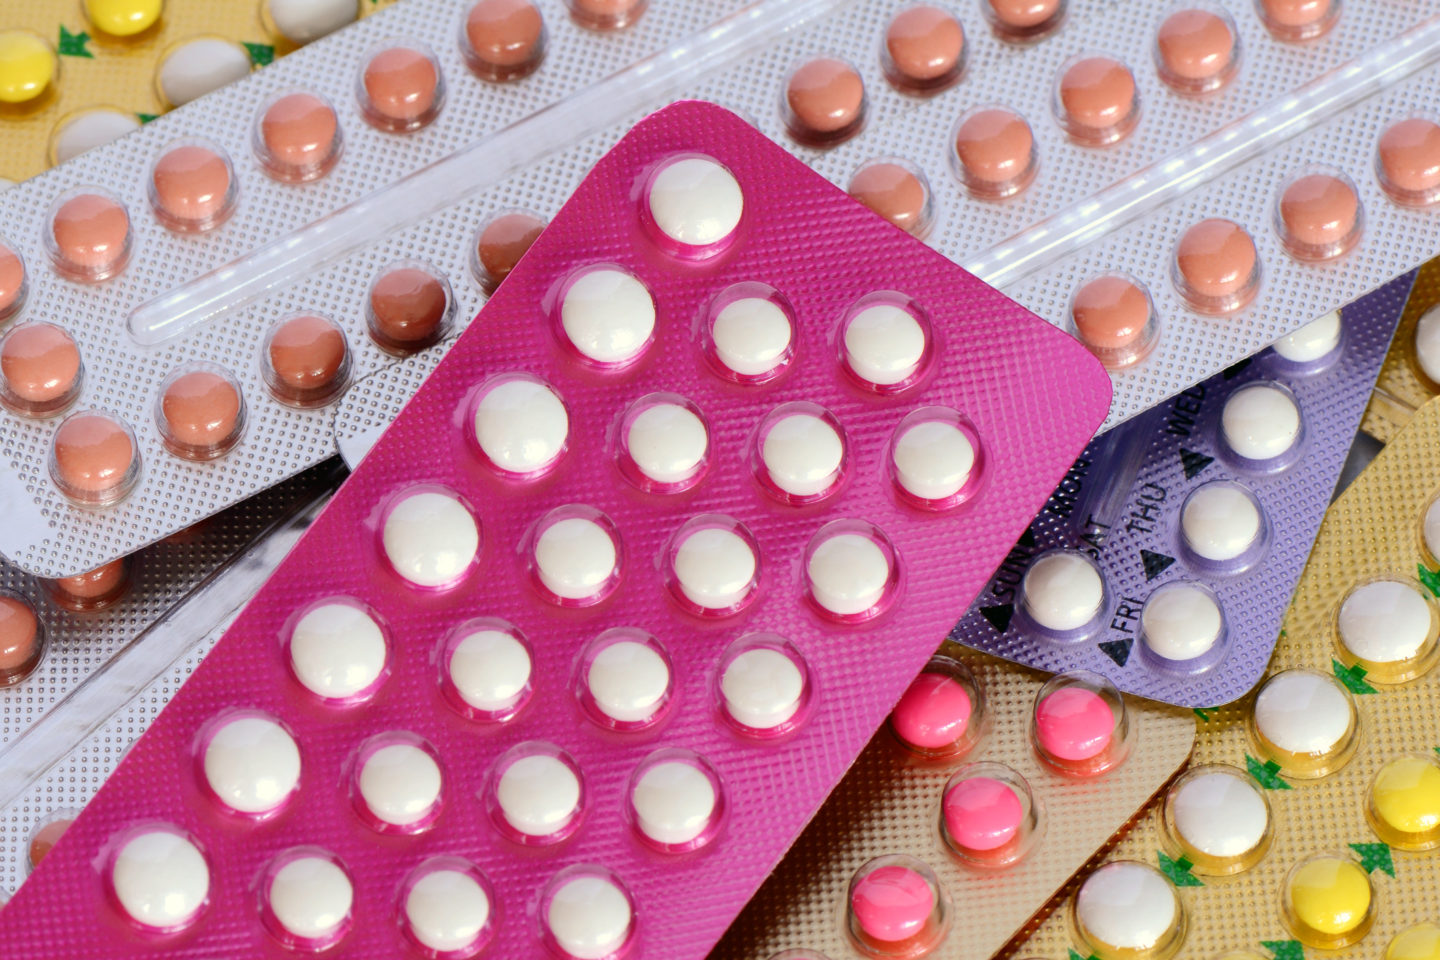 Bedsider Makes It Easier To Choose Your Birth Control